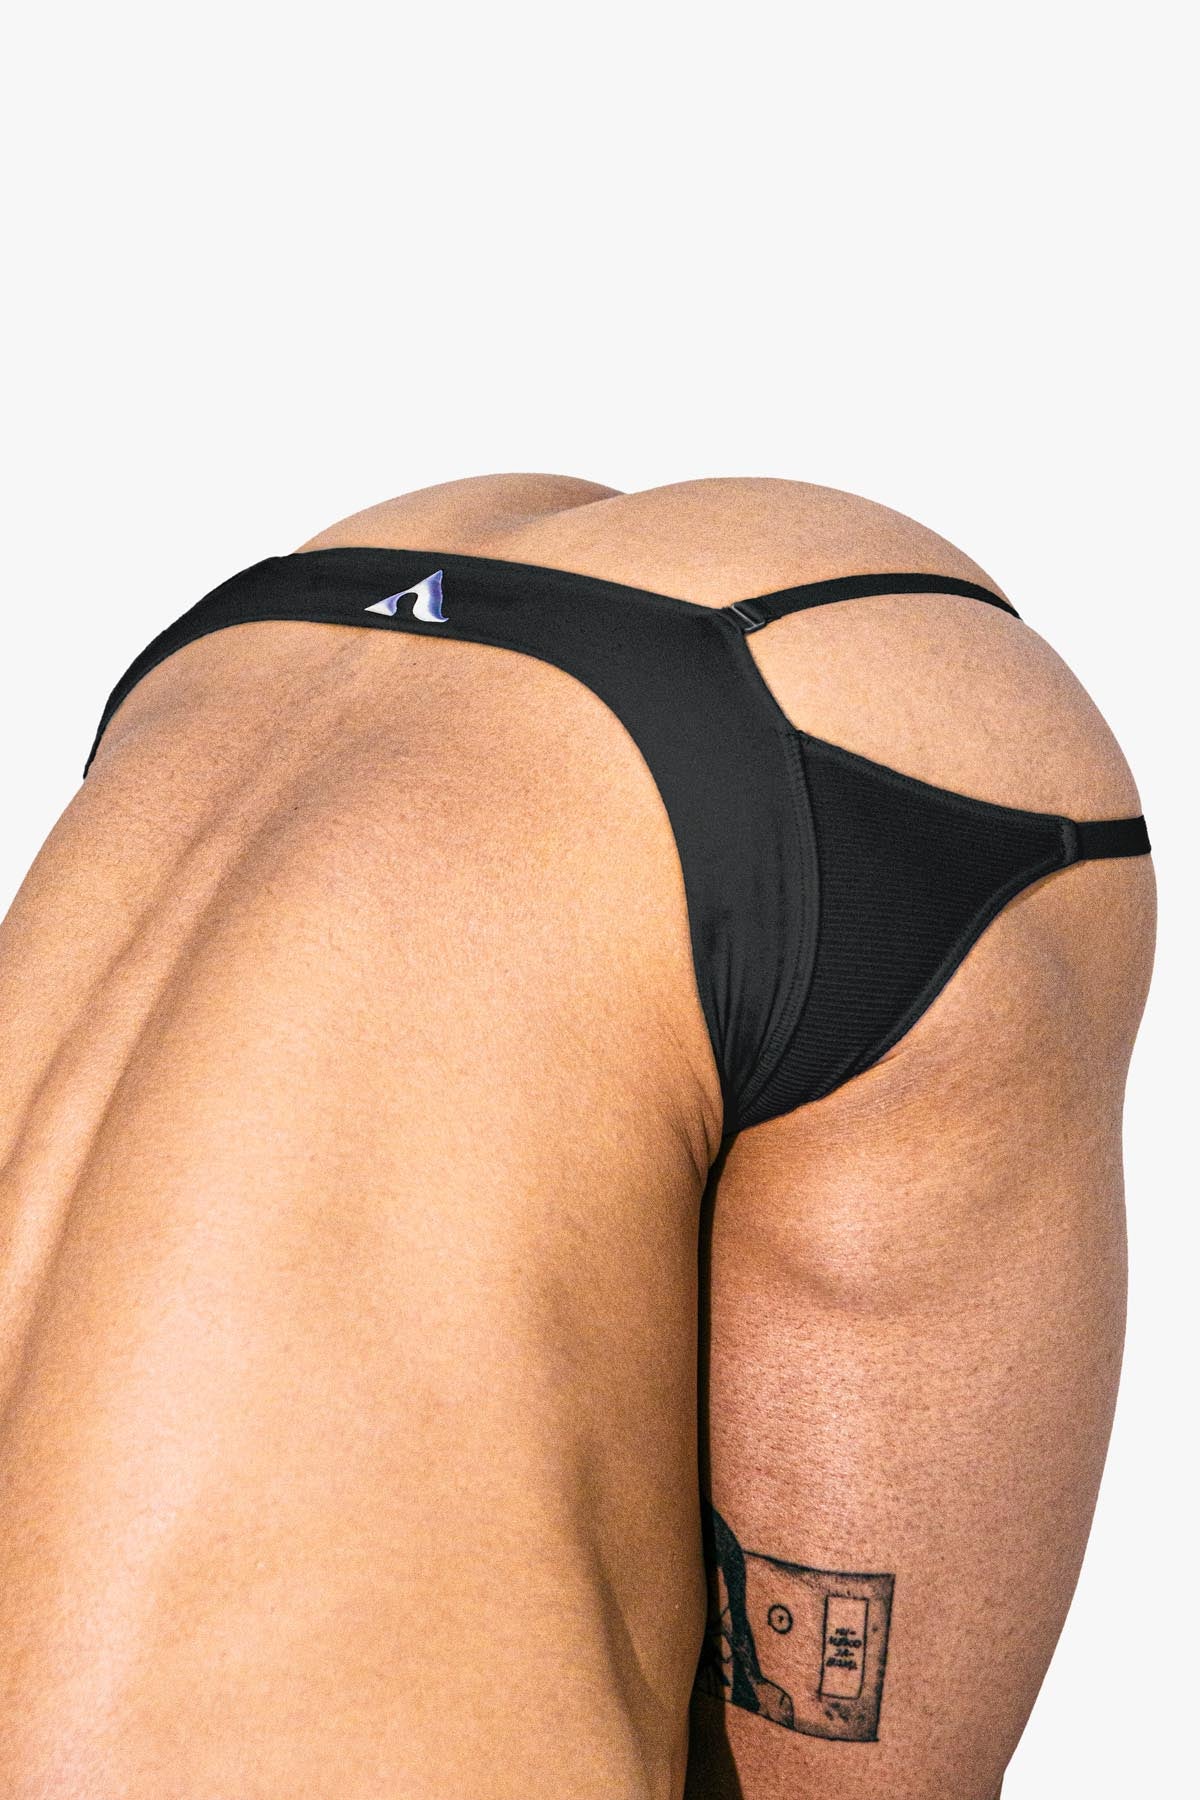 Ribbed Strap Brief - Pouch, Black